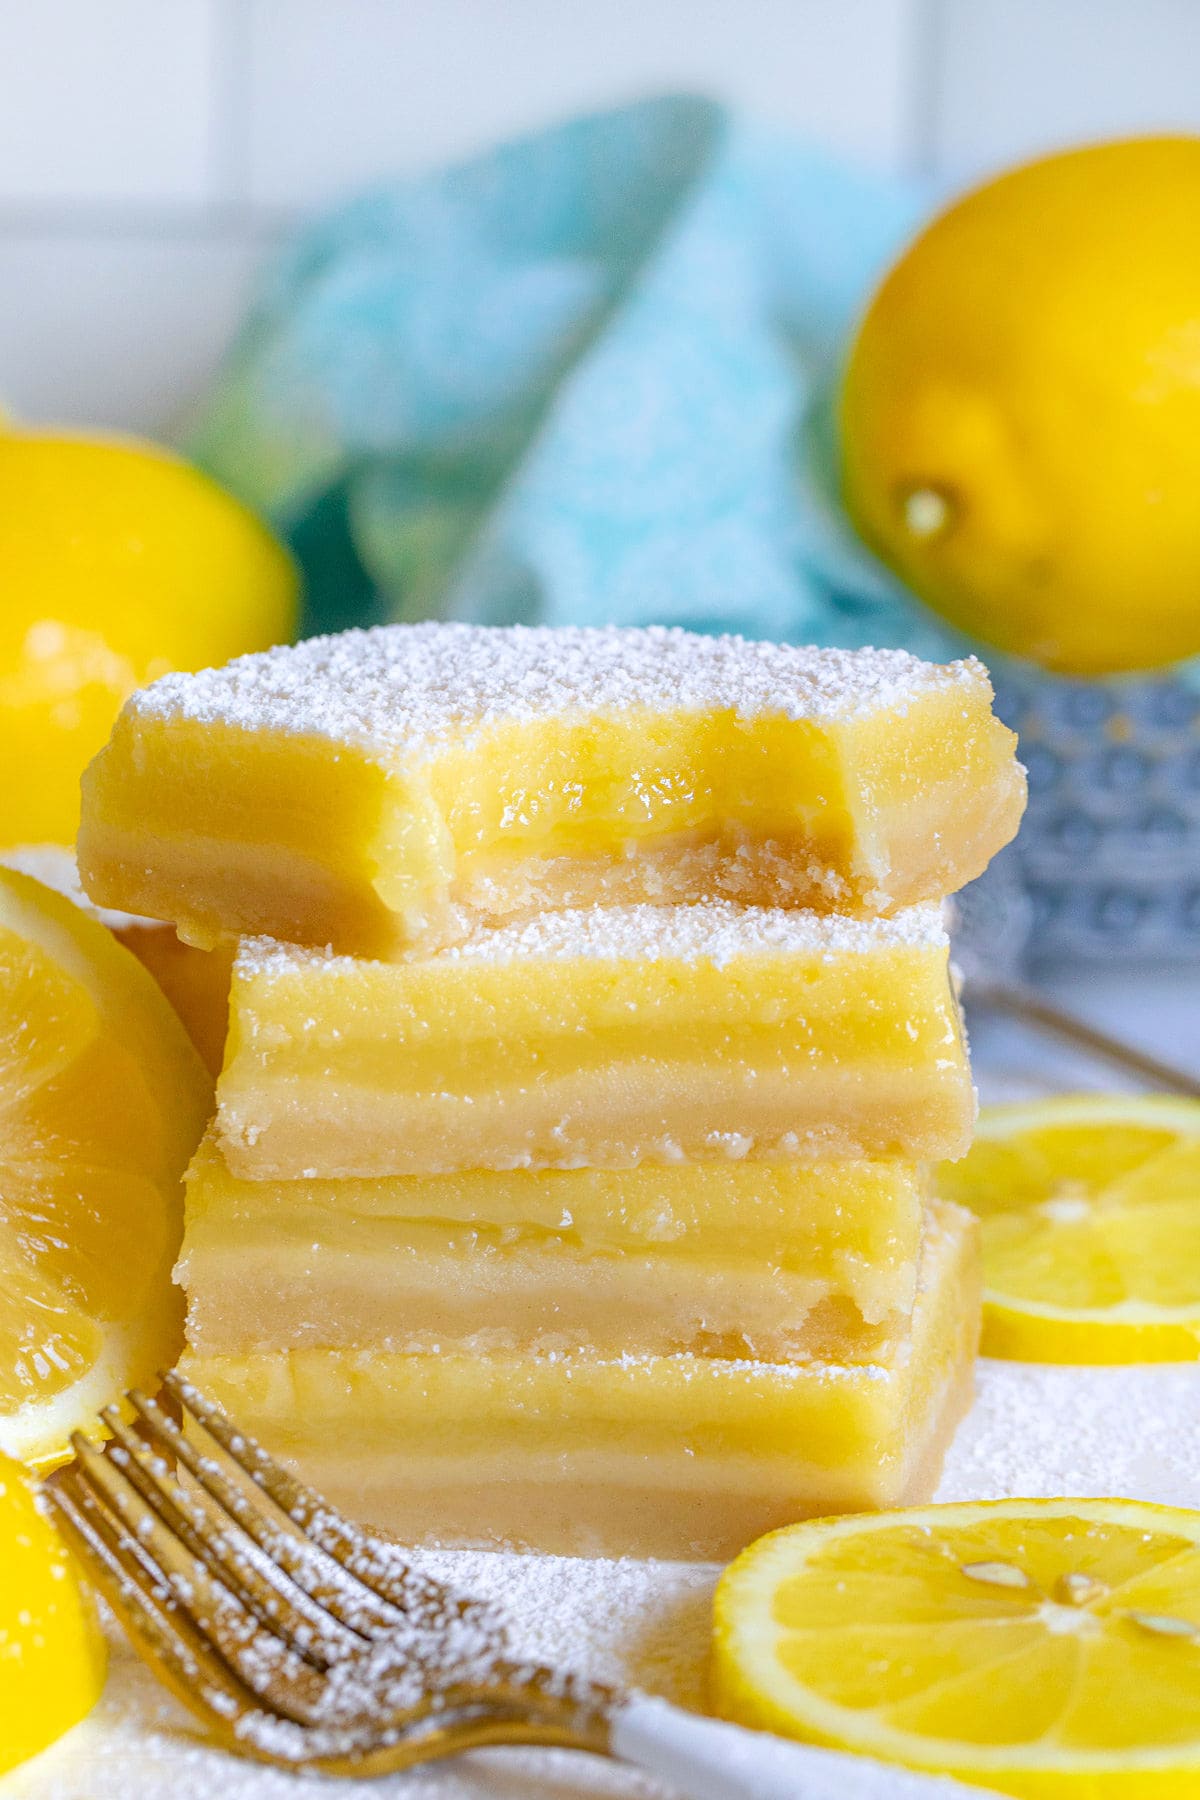 stack of four lemon bars with the top bar having a bite taken.